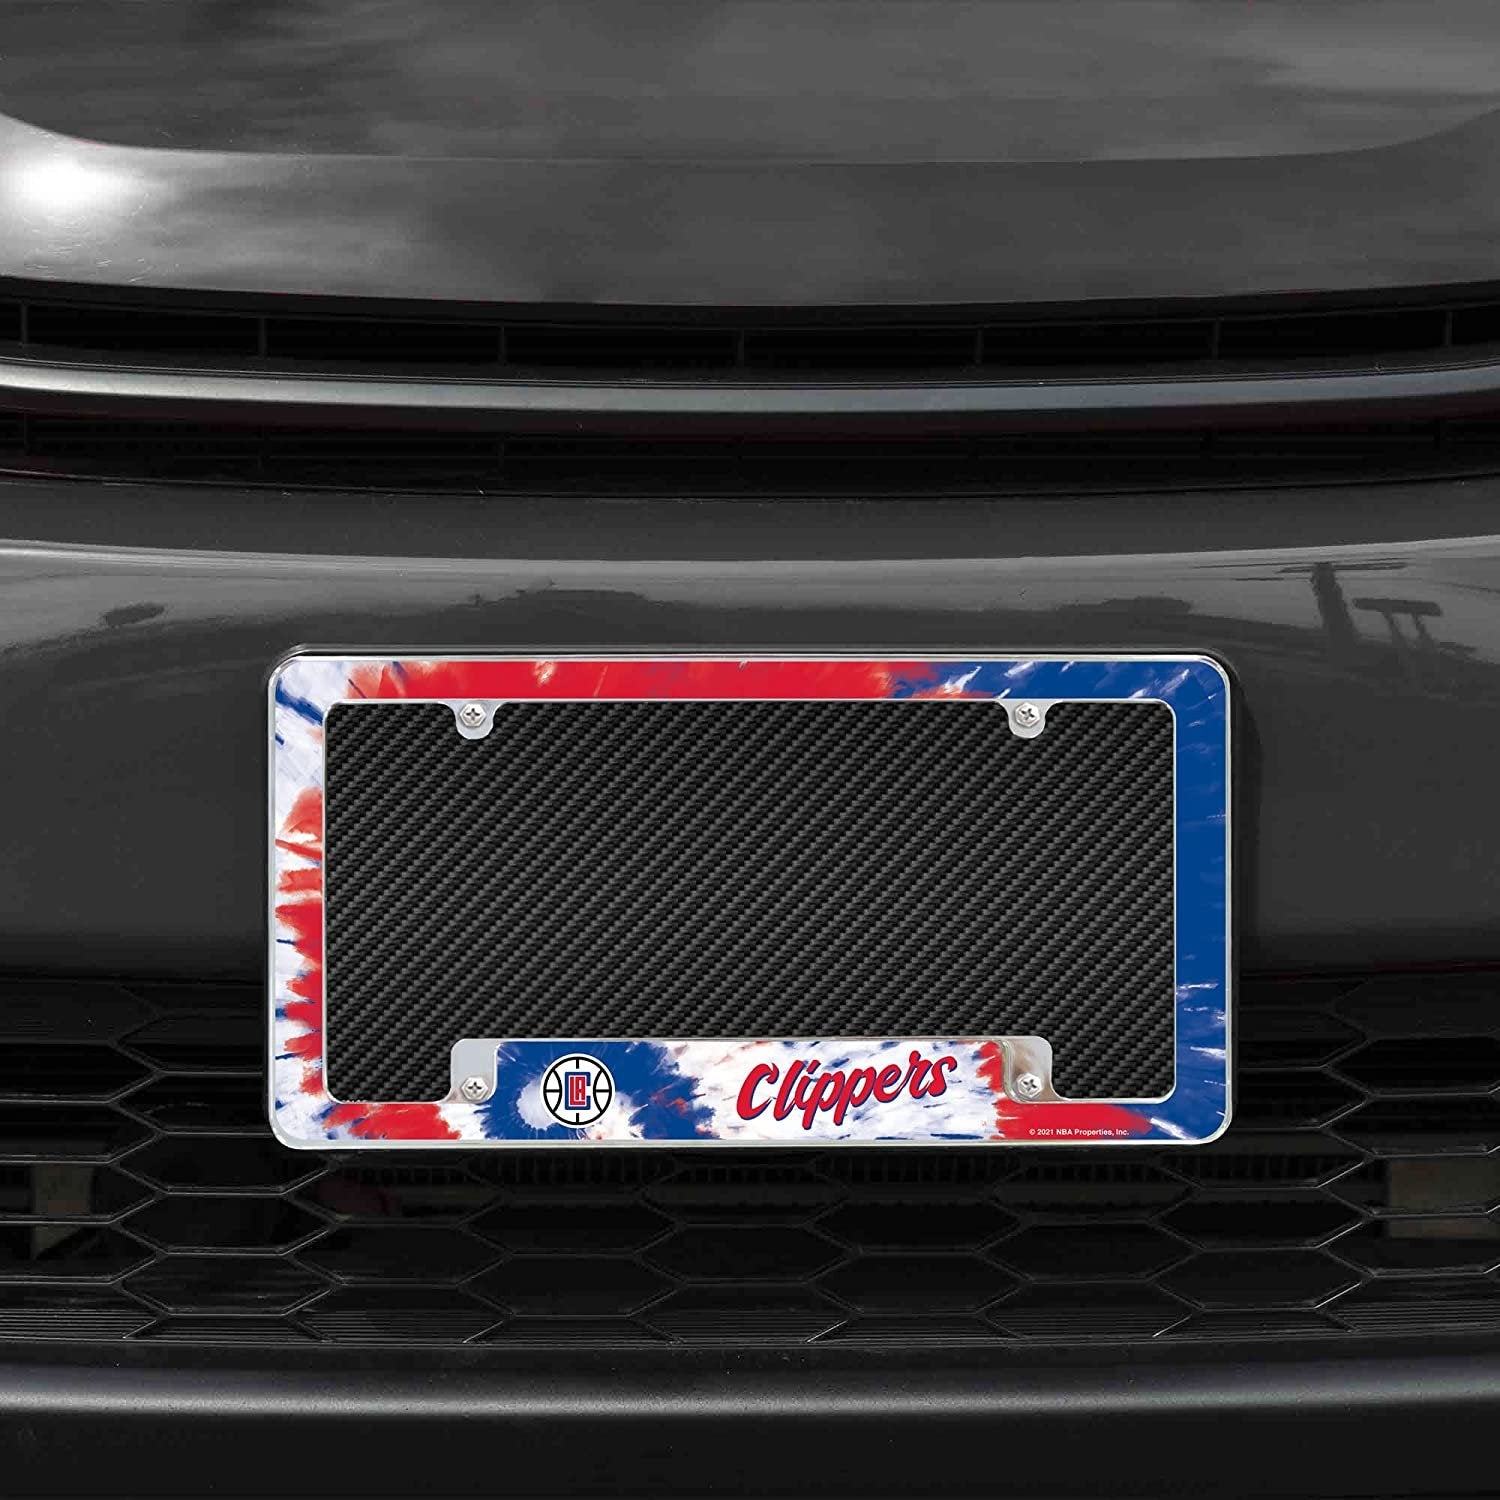 Los Angeles Clippers Metal License Plate Frame Chrome Tag Cover Tie Dye Design 6x12 Inch